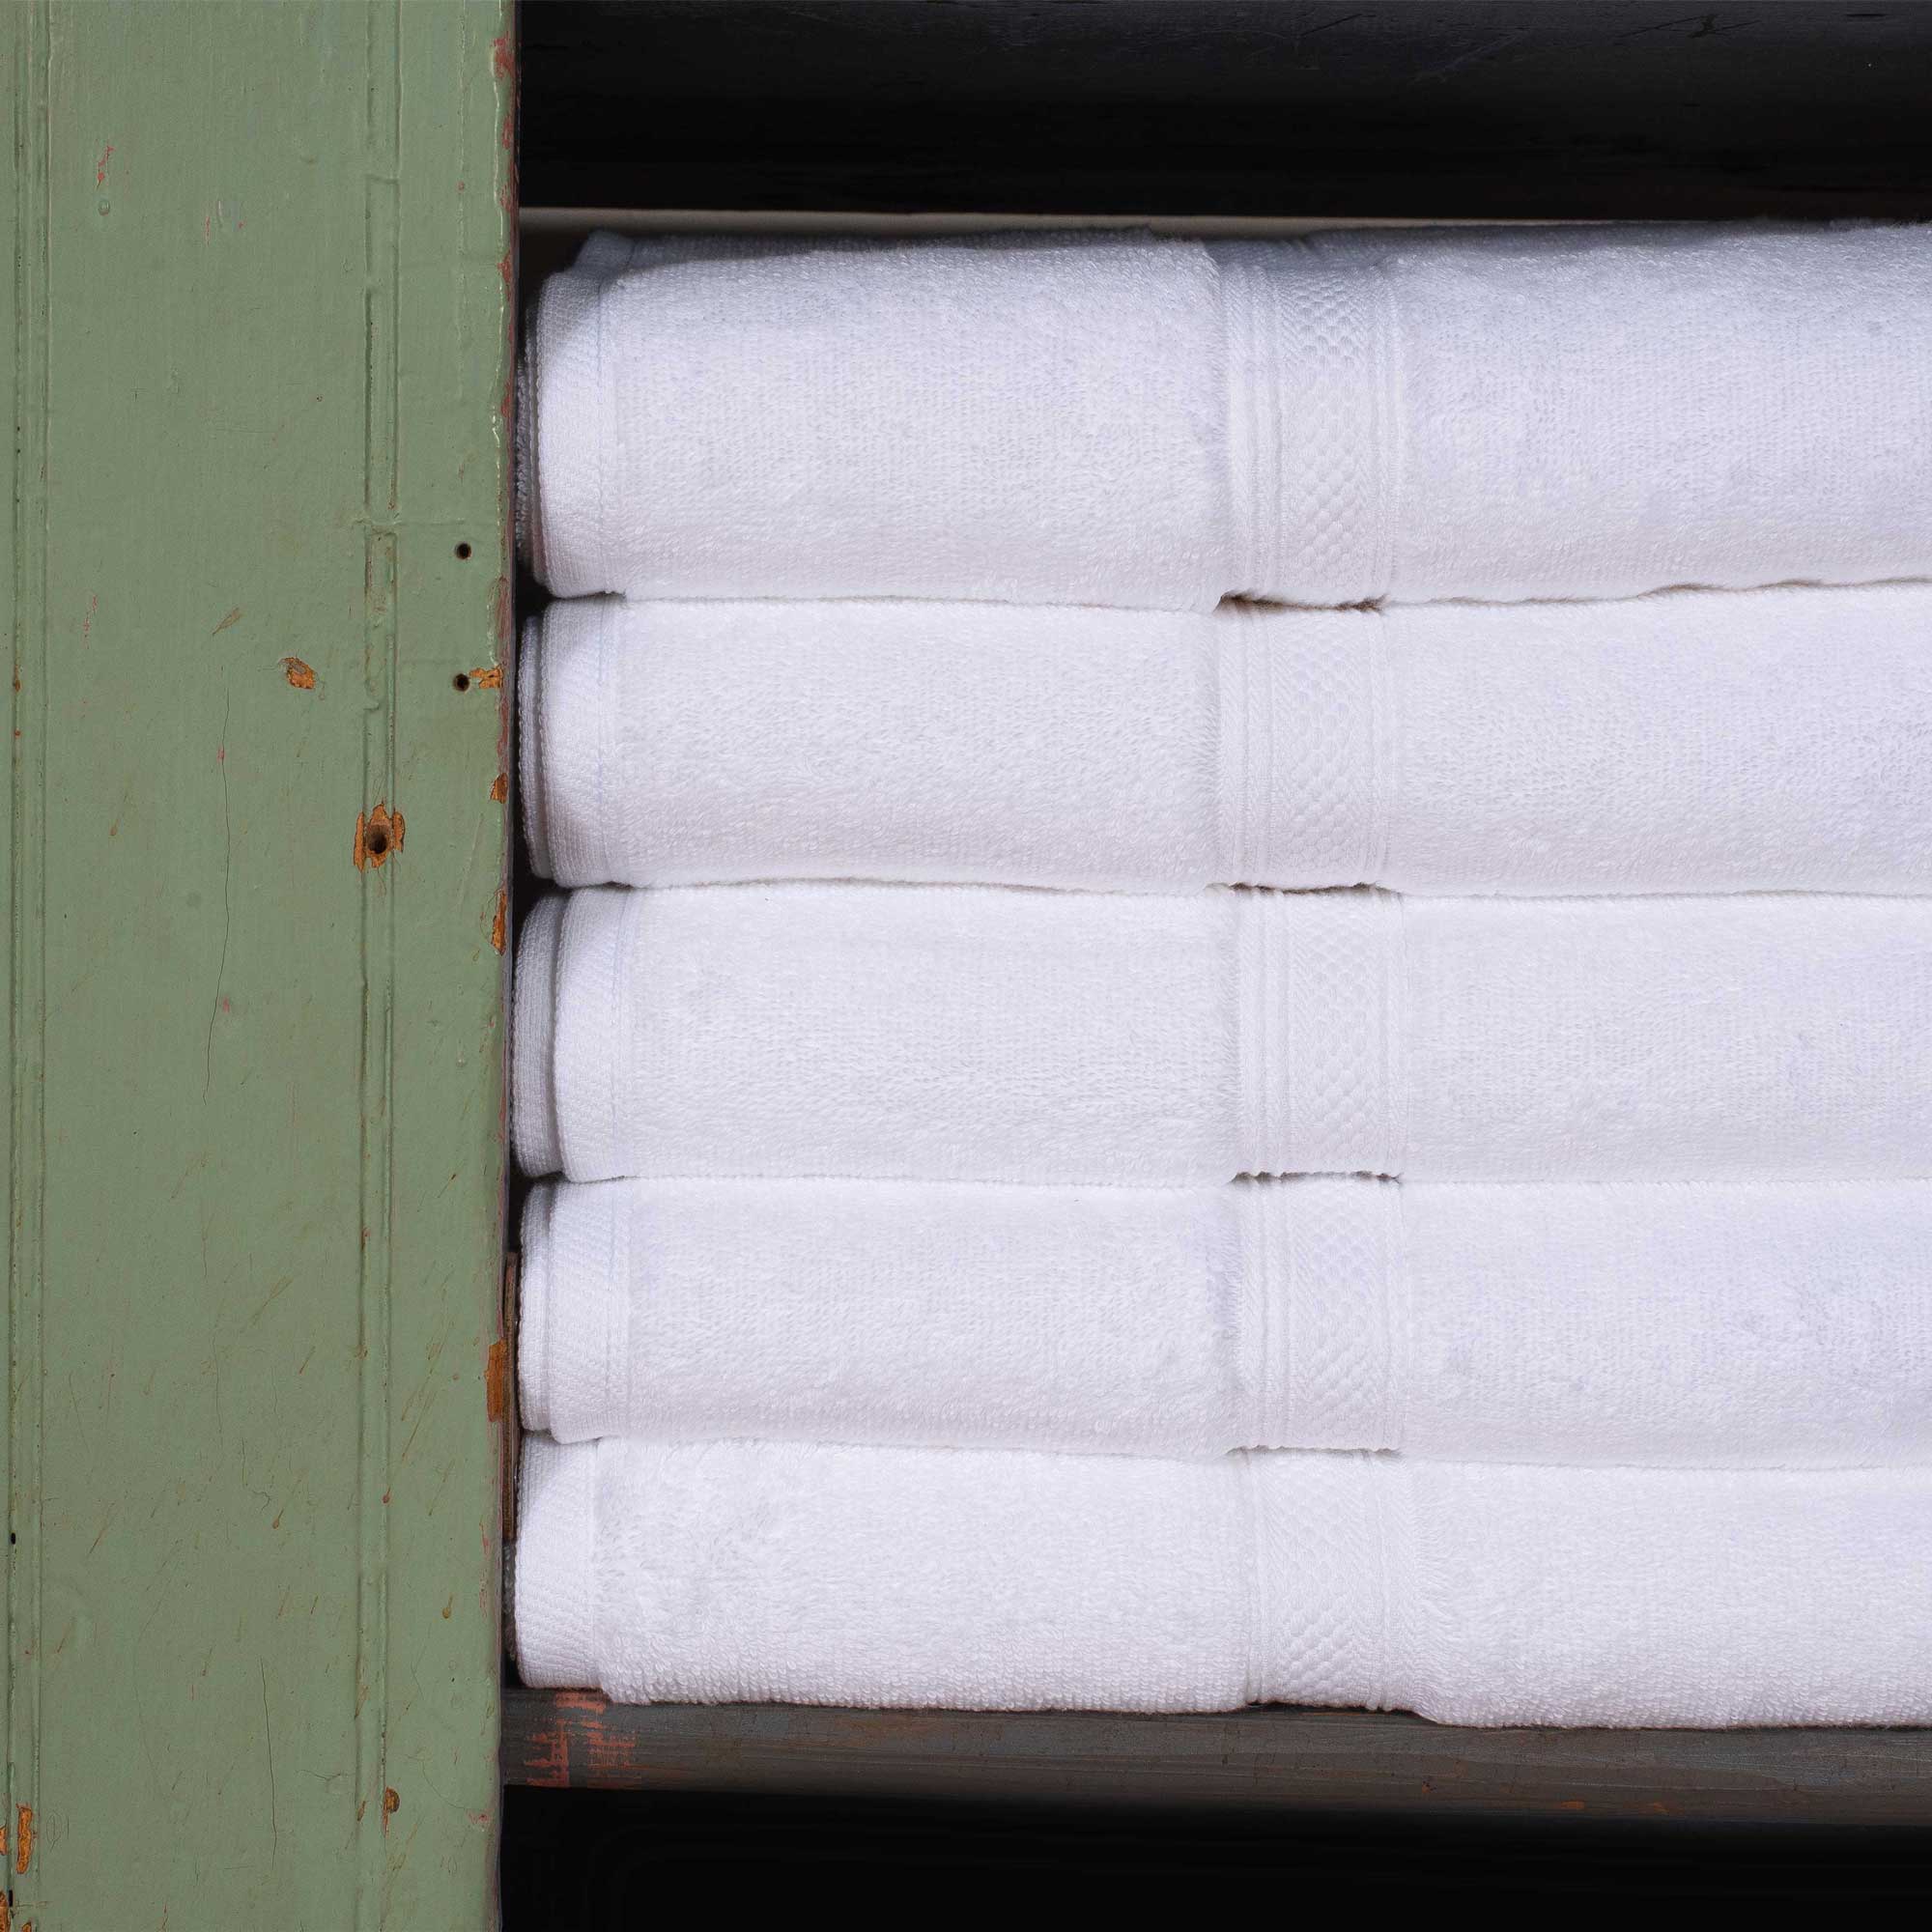 Cotton Roll High Quality ( Made in USA) -AC615